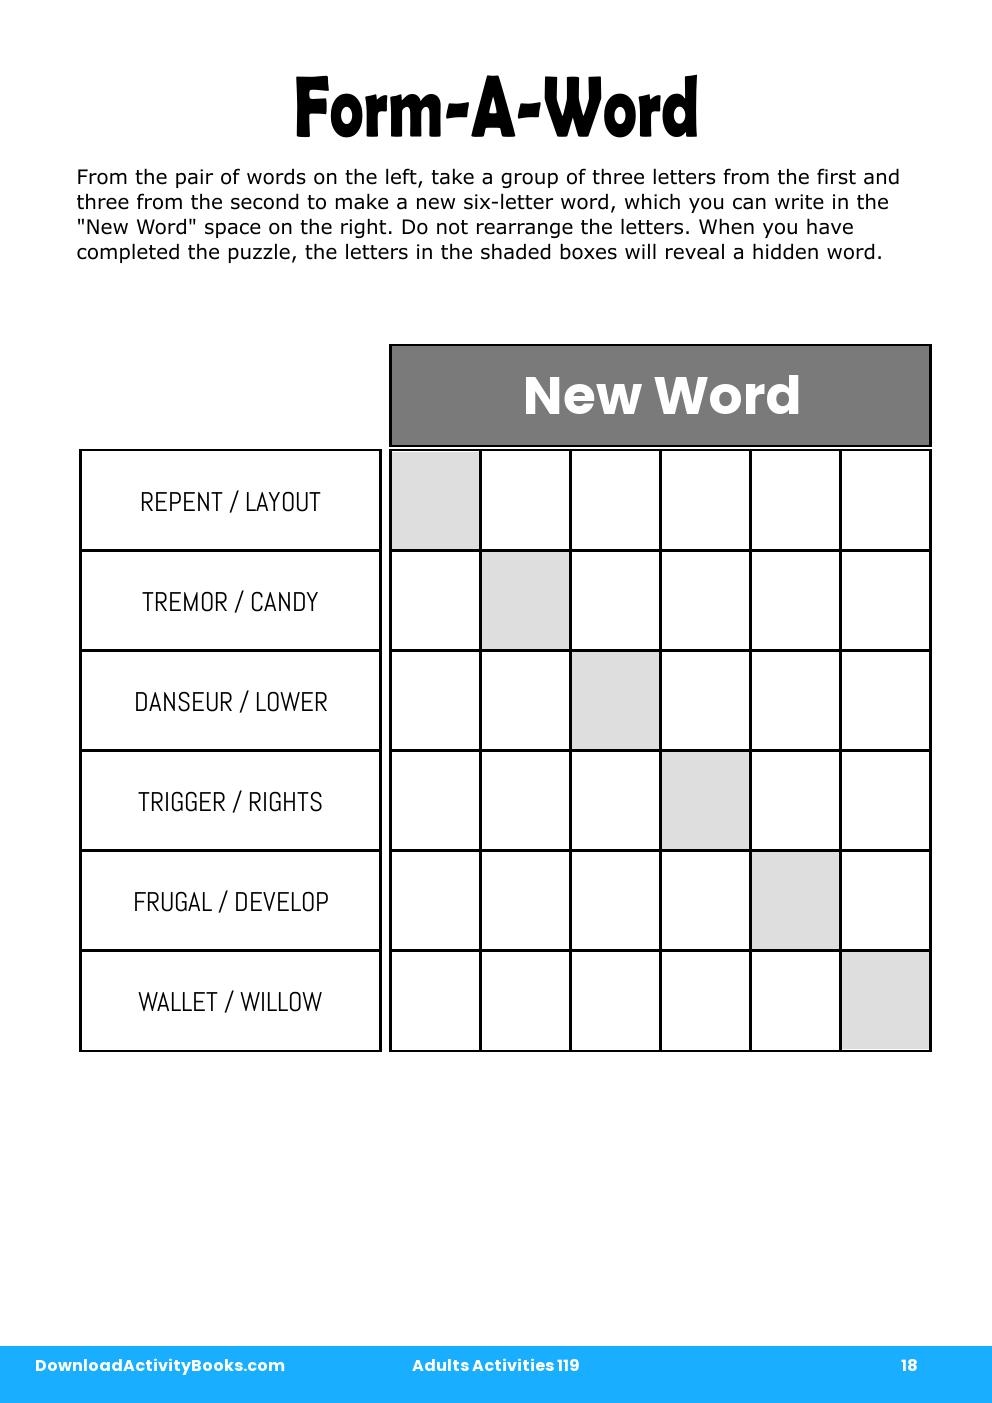 Form-A-Word in Adults Activities 119